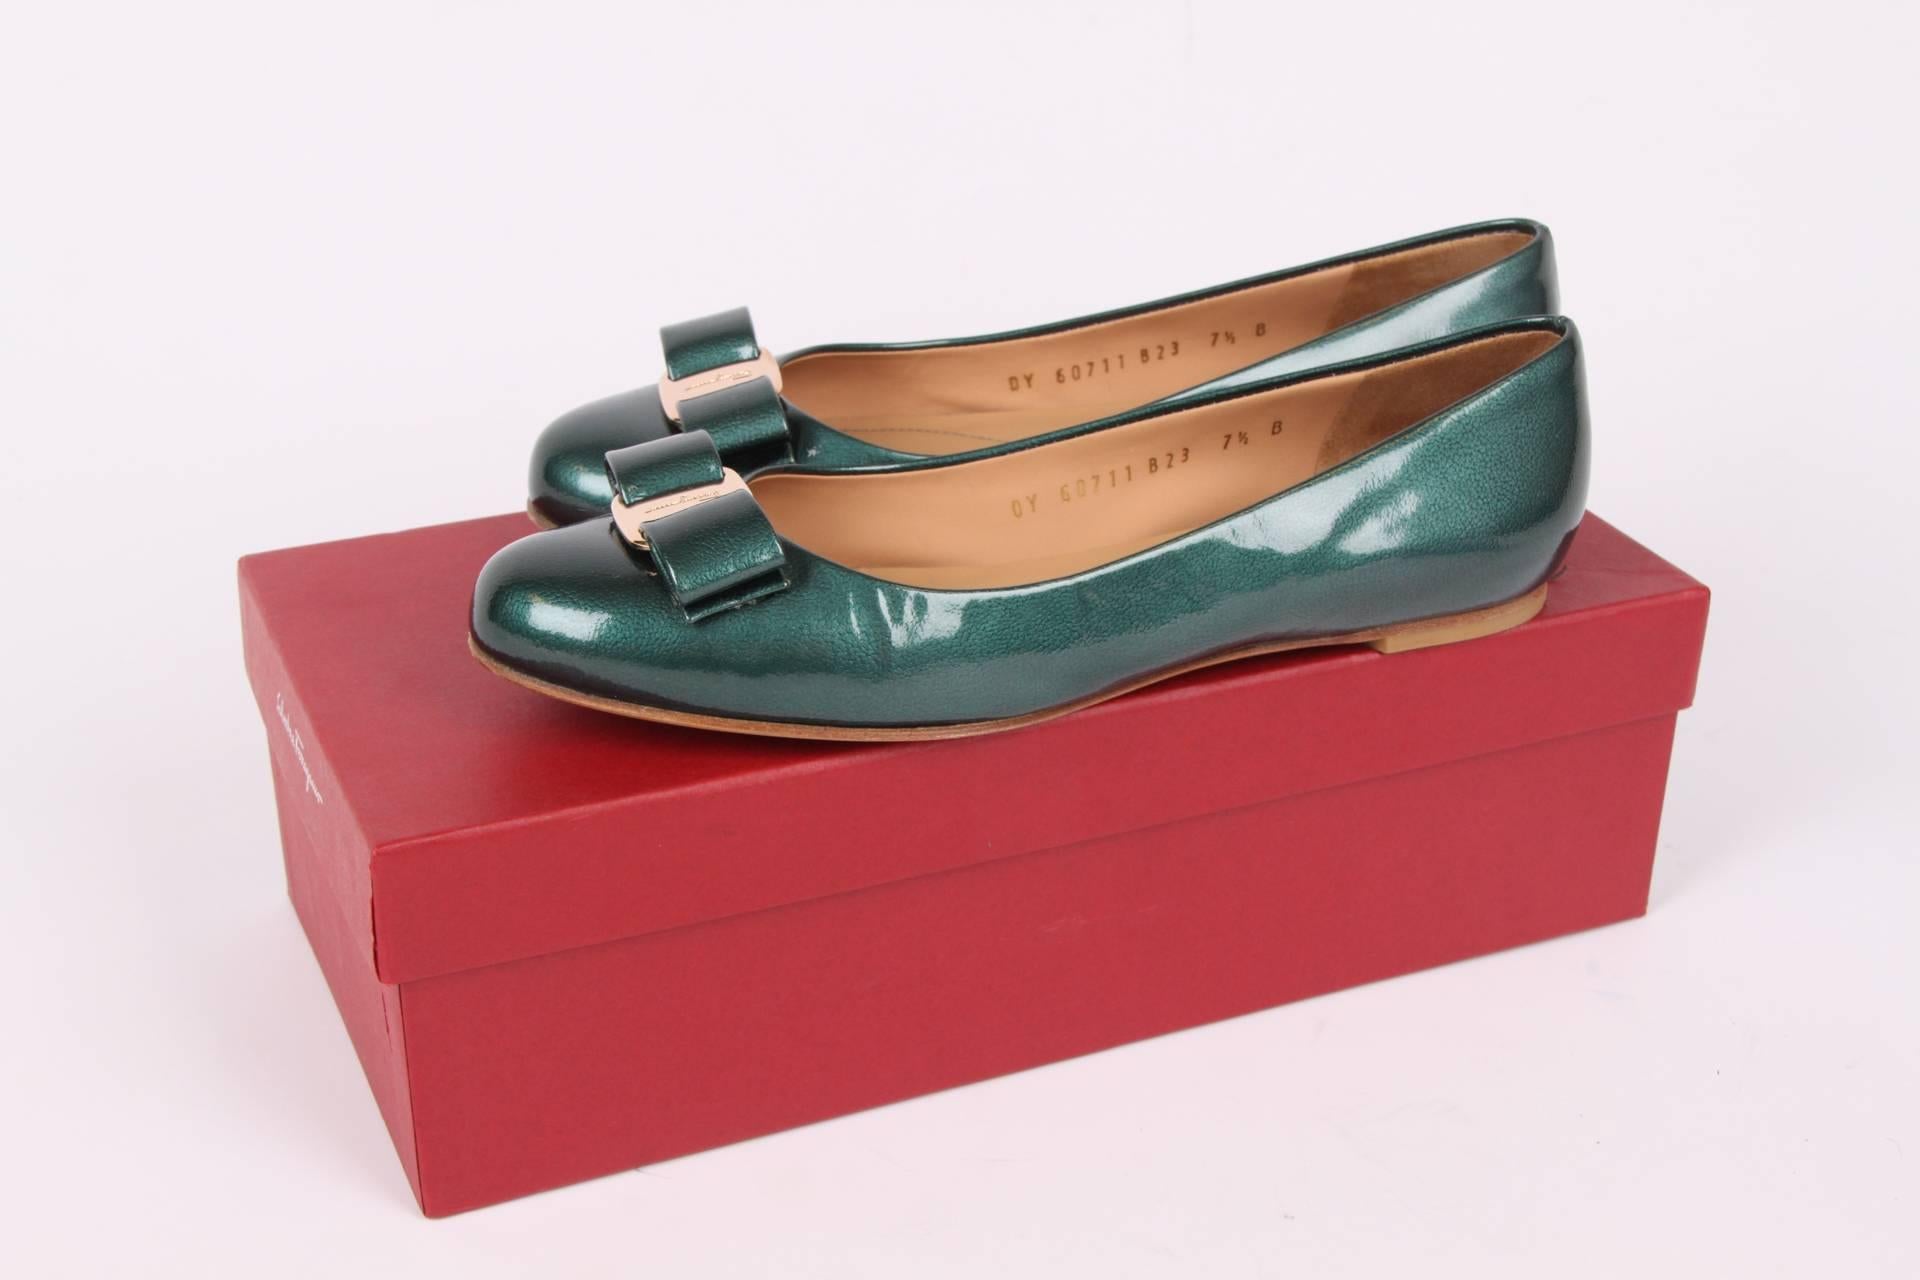 Chic ballerina flats by Salvatore Ferragamo crafted in green metallic patent leather.

A round toe with a bow and a shiny gold-tone metal plaque with embossing of a Ferragamo logo. Leather outsole and a low heel that measures a little under 1